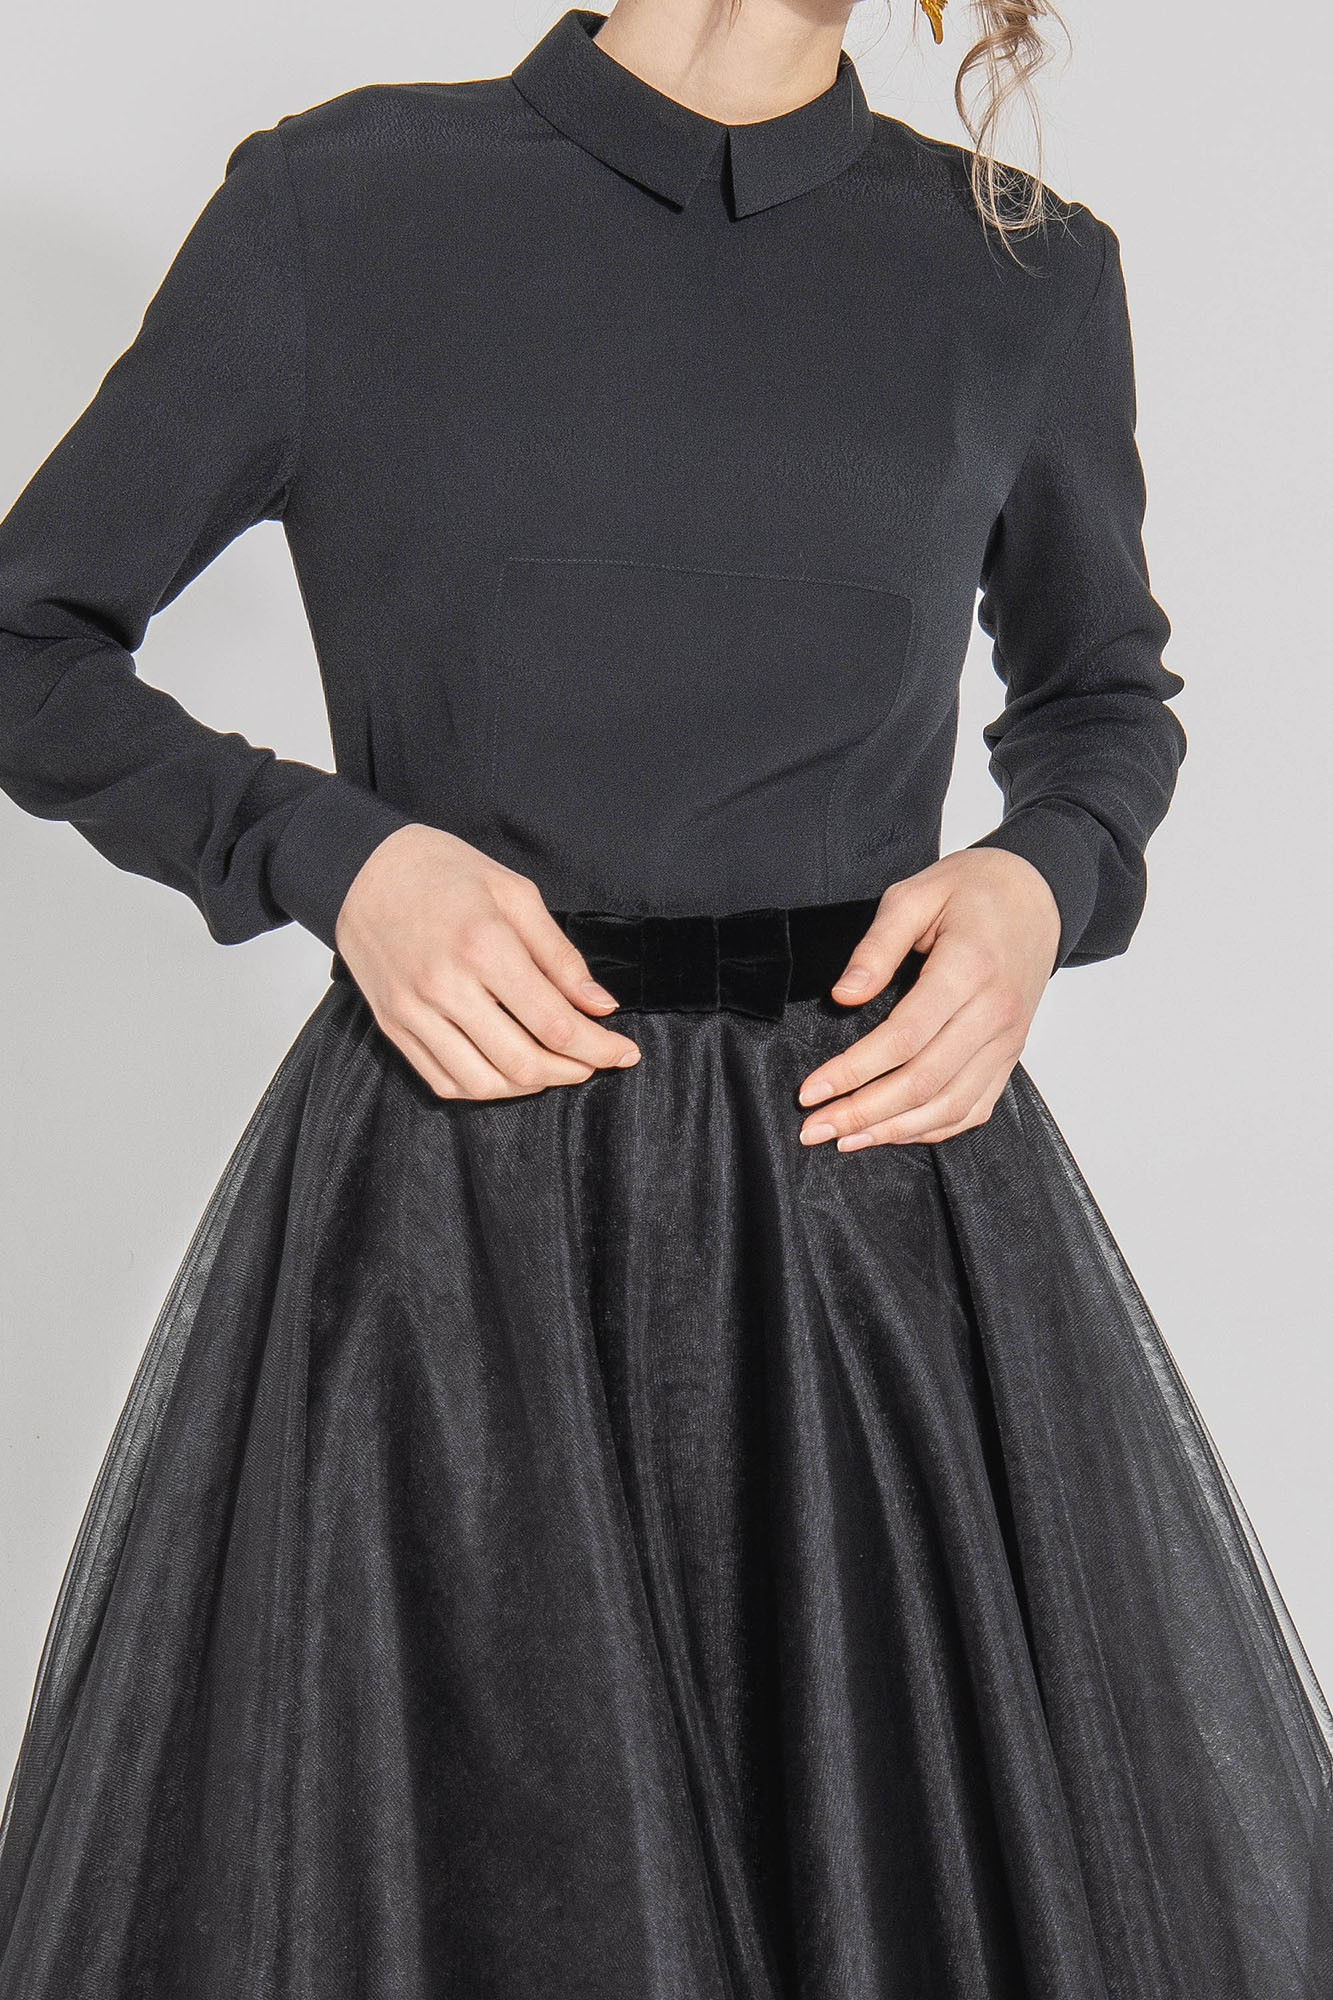 tulle skirt with a bow on the belt in black close up • Sassa Björg